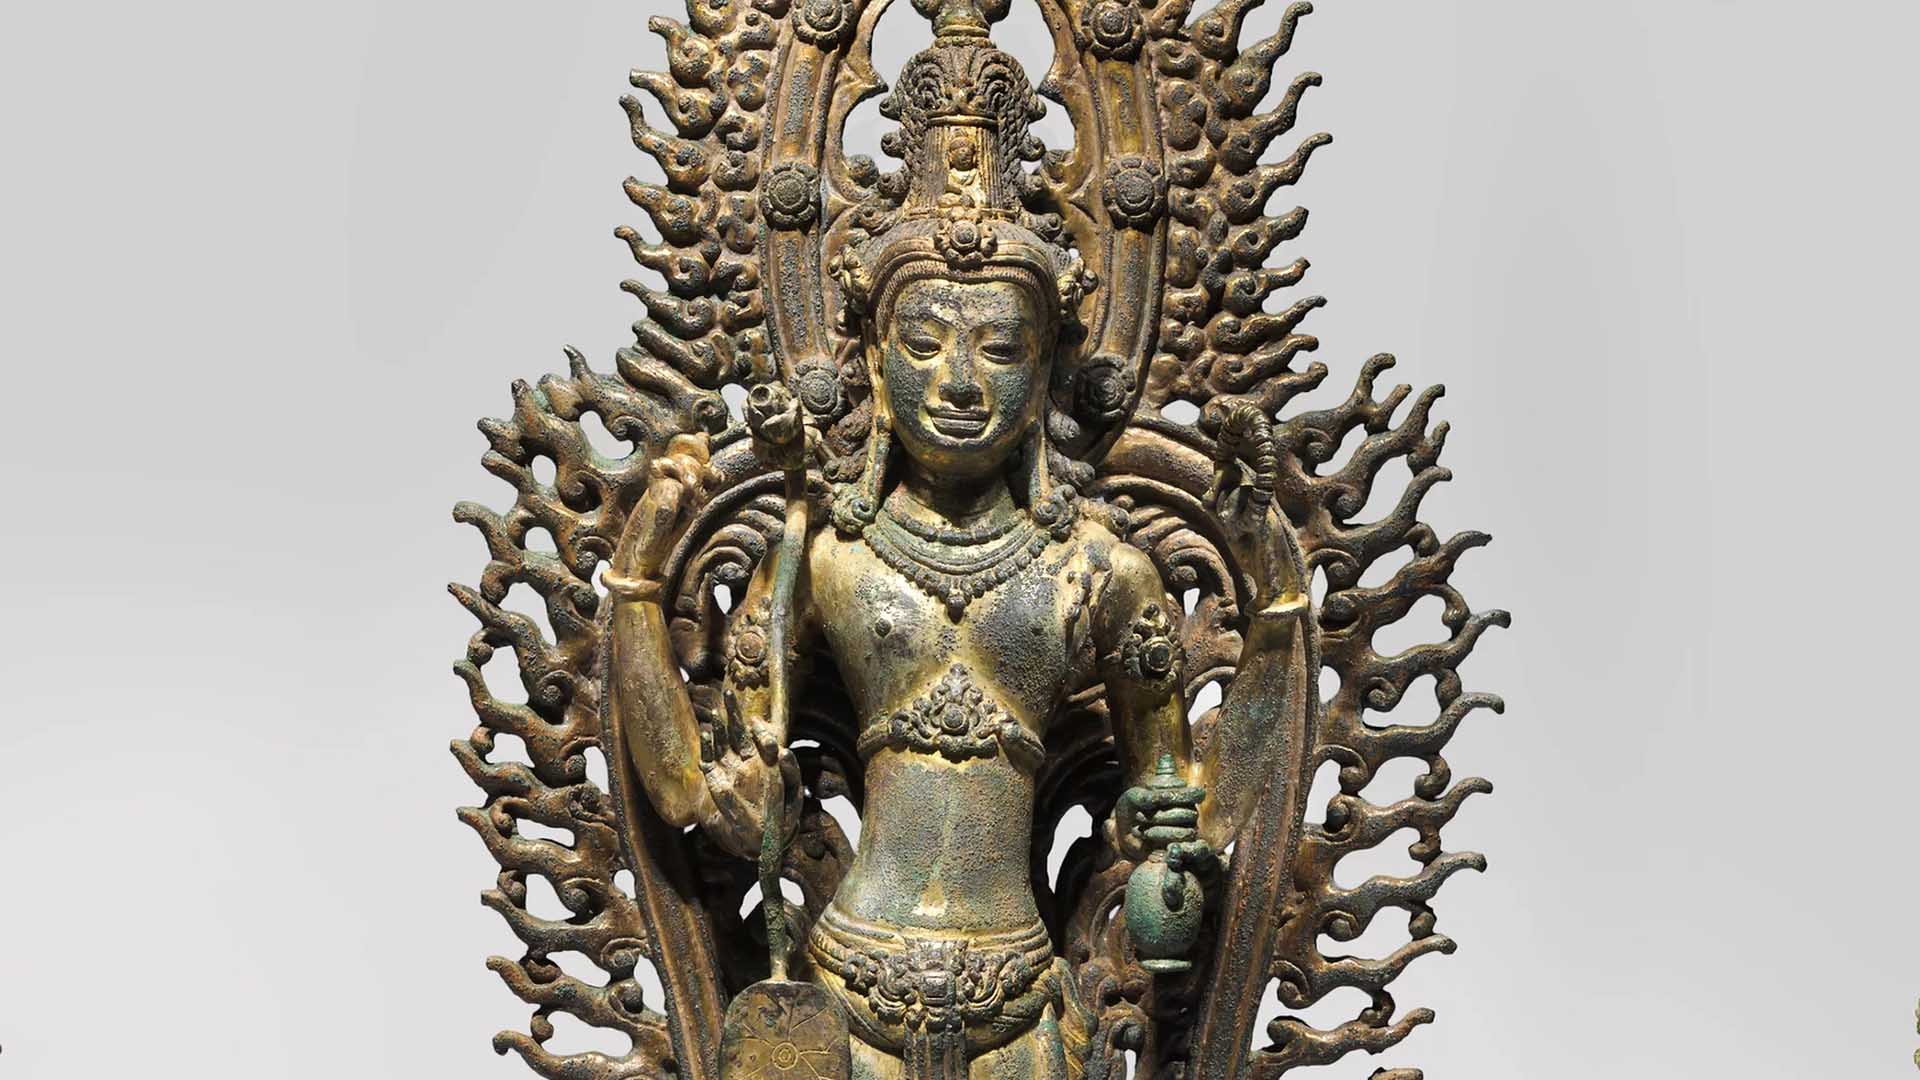 A close-up of a 9th or 10th century bronze statue from Cambodia